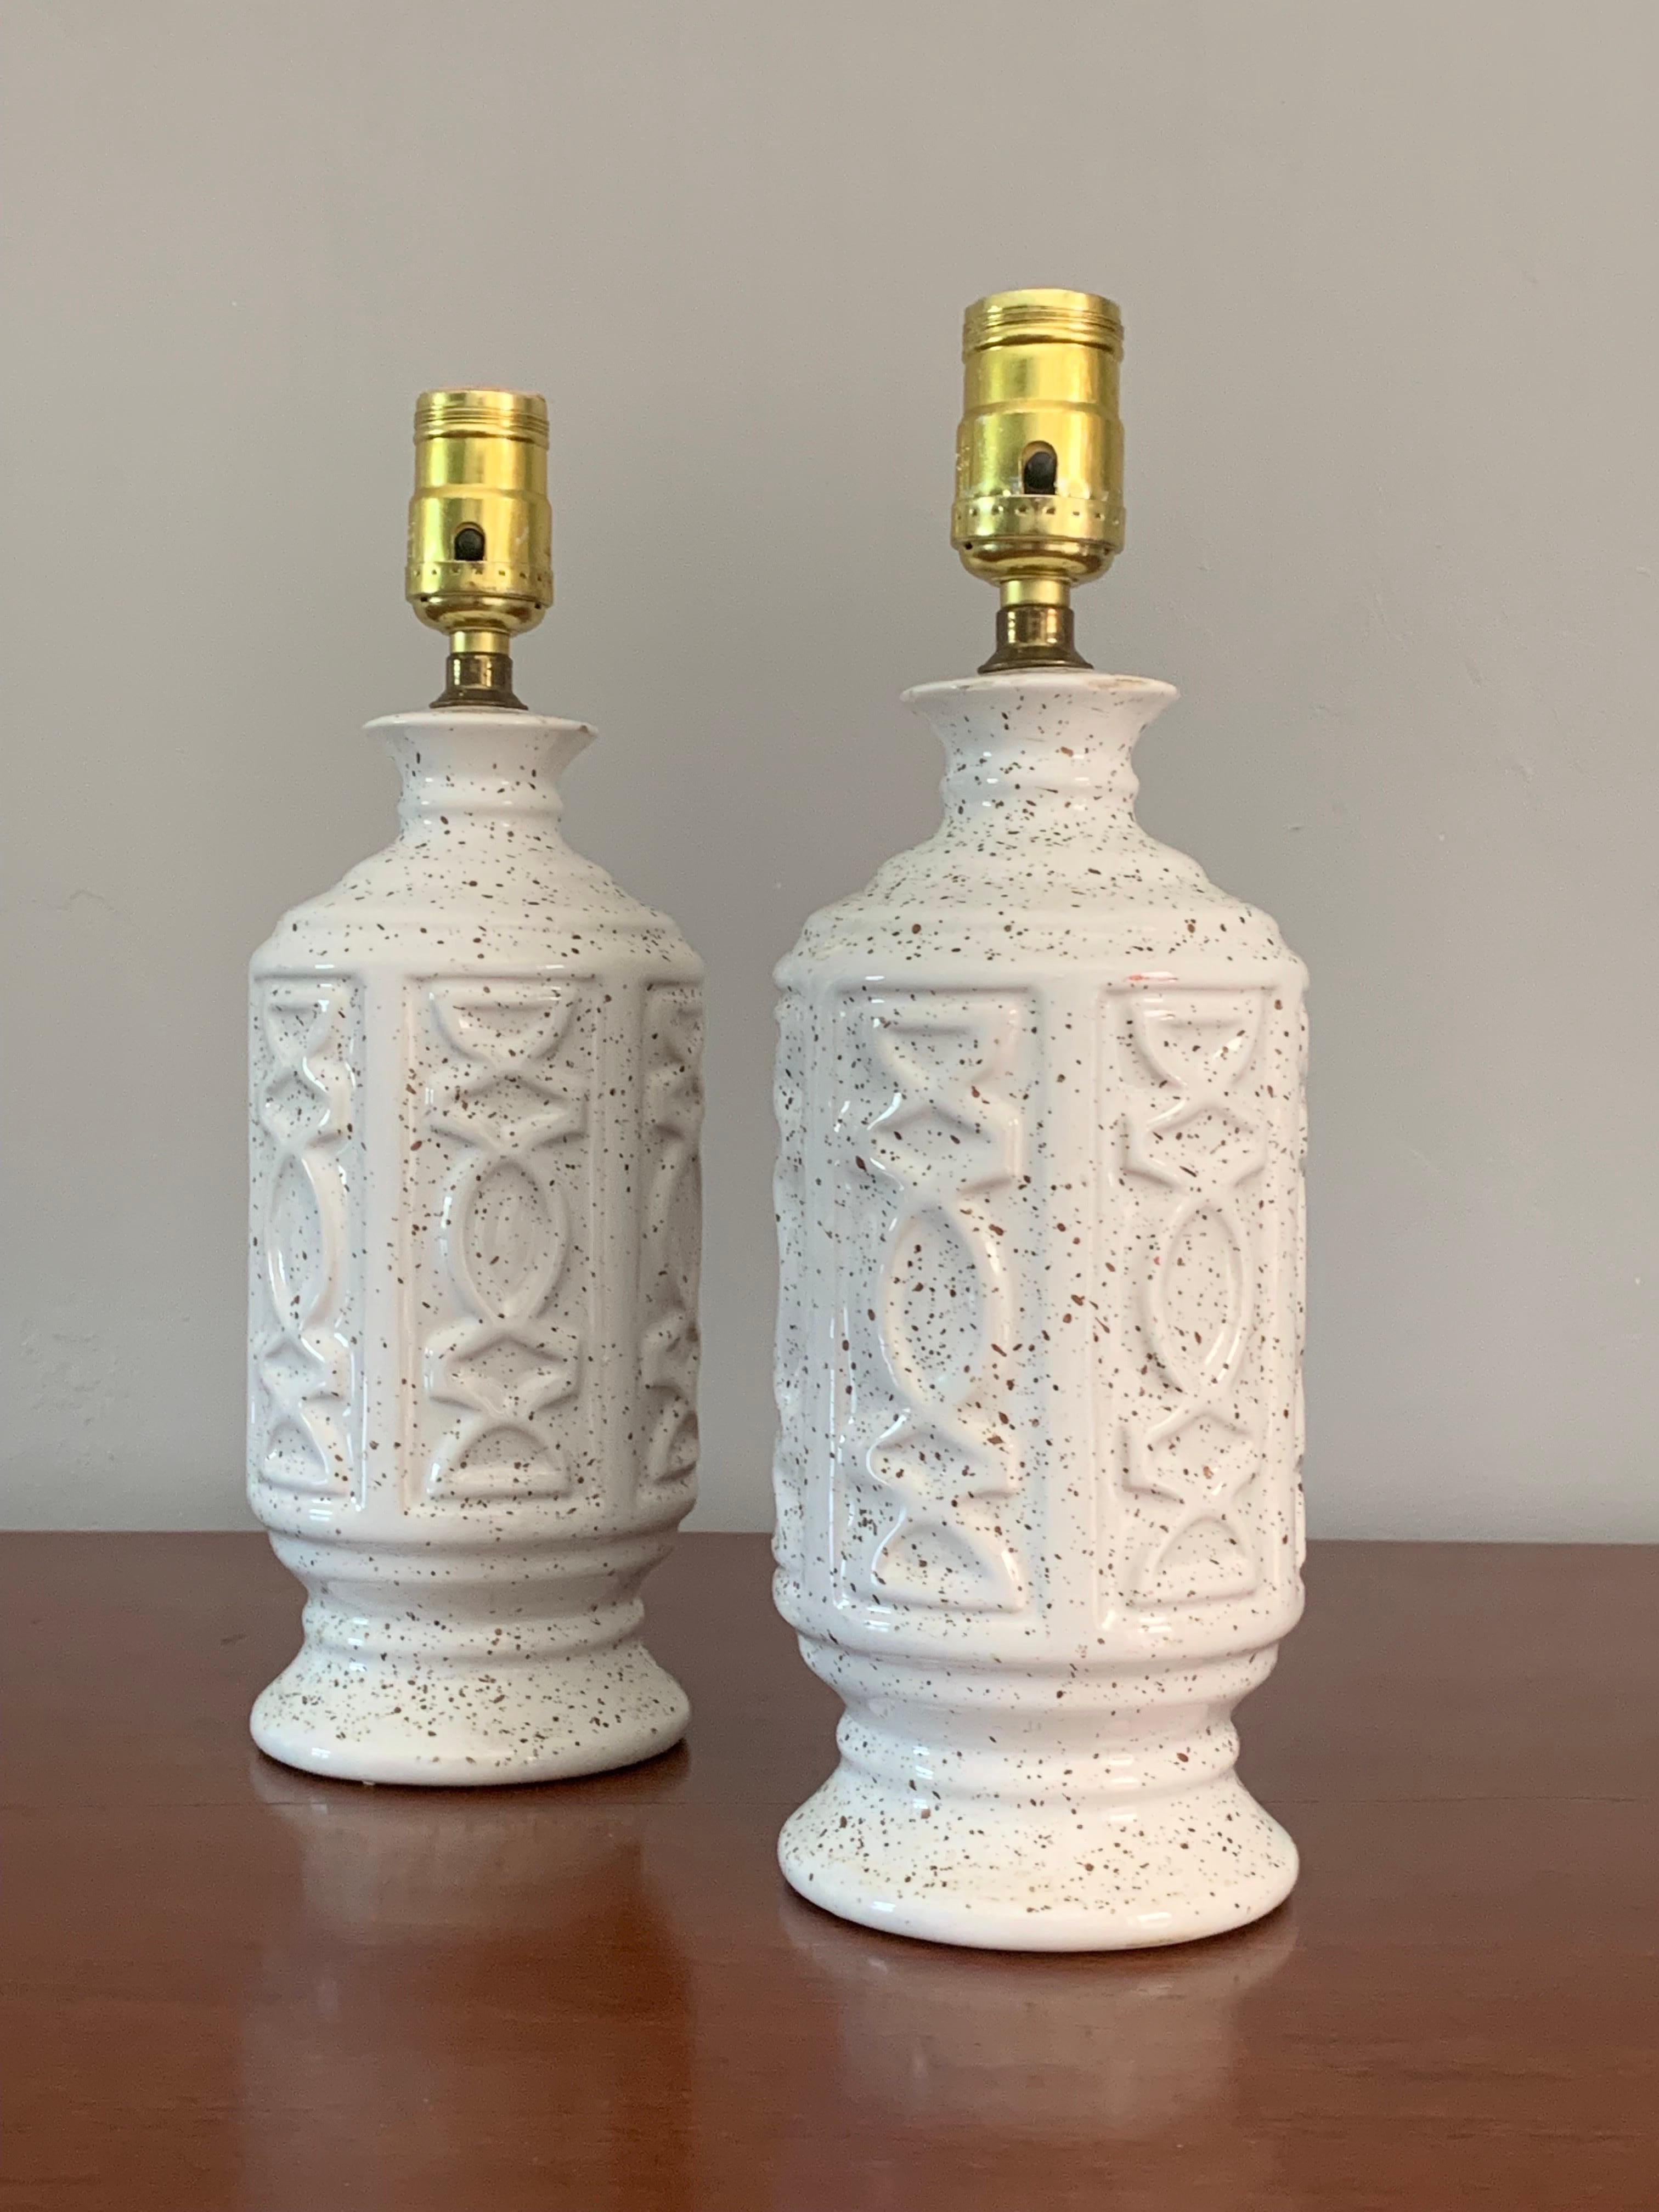 Petite and cute. This pair of ceramic table lamps can add a brightness and fun to any room. Clean design with some light flair. Smaller in stature than most 1950s lamps so you can have an authentic mid century lighting option with out the towering